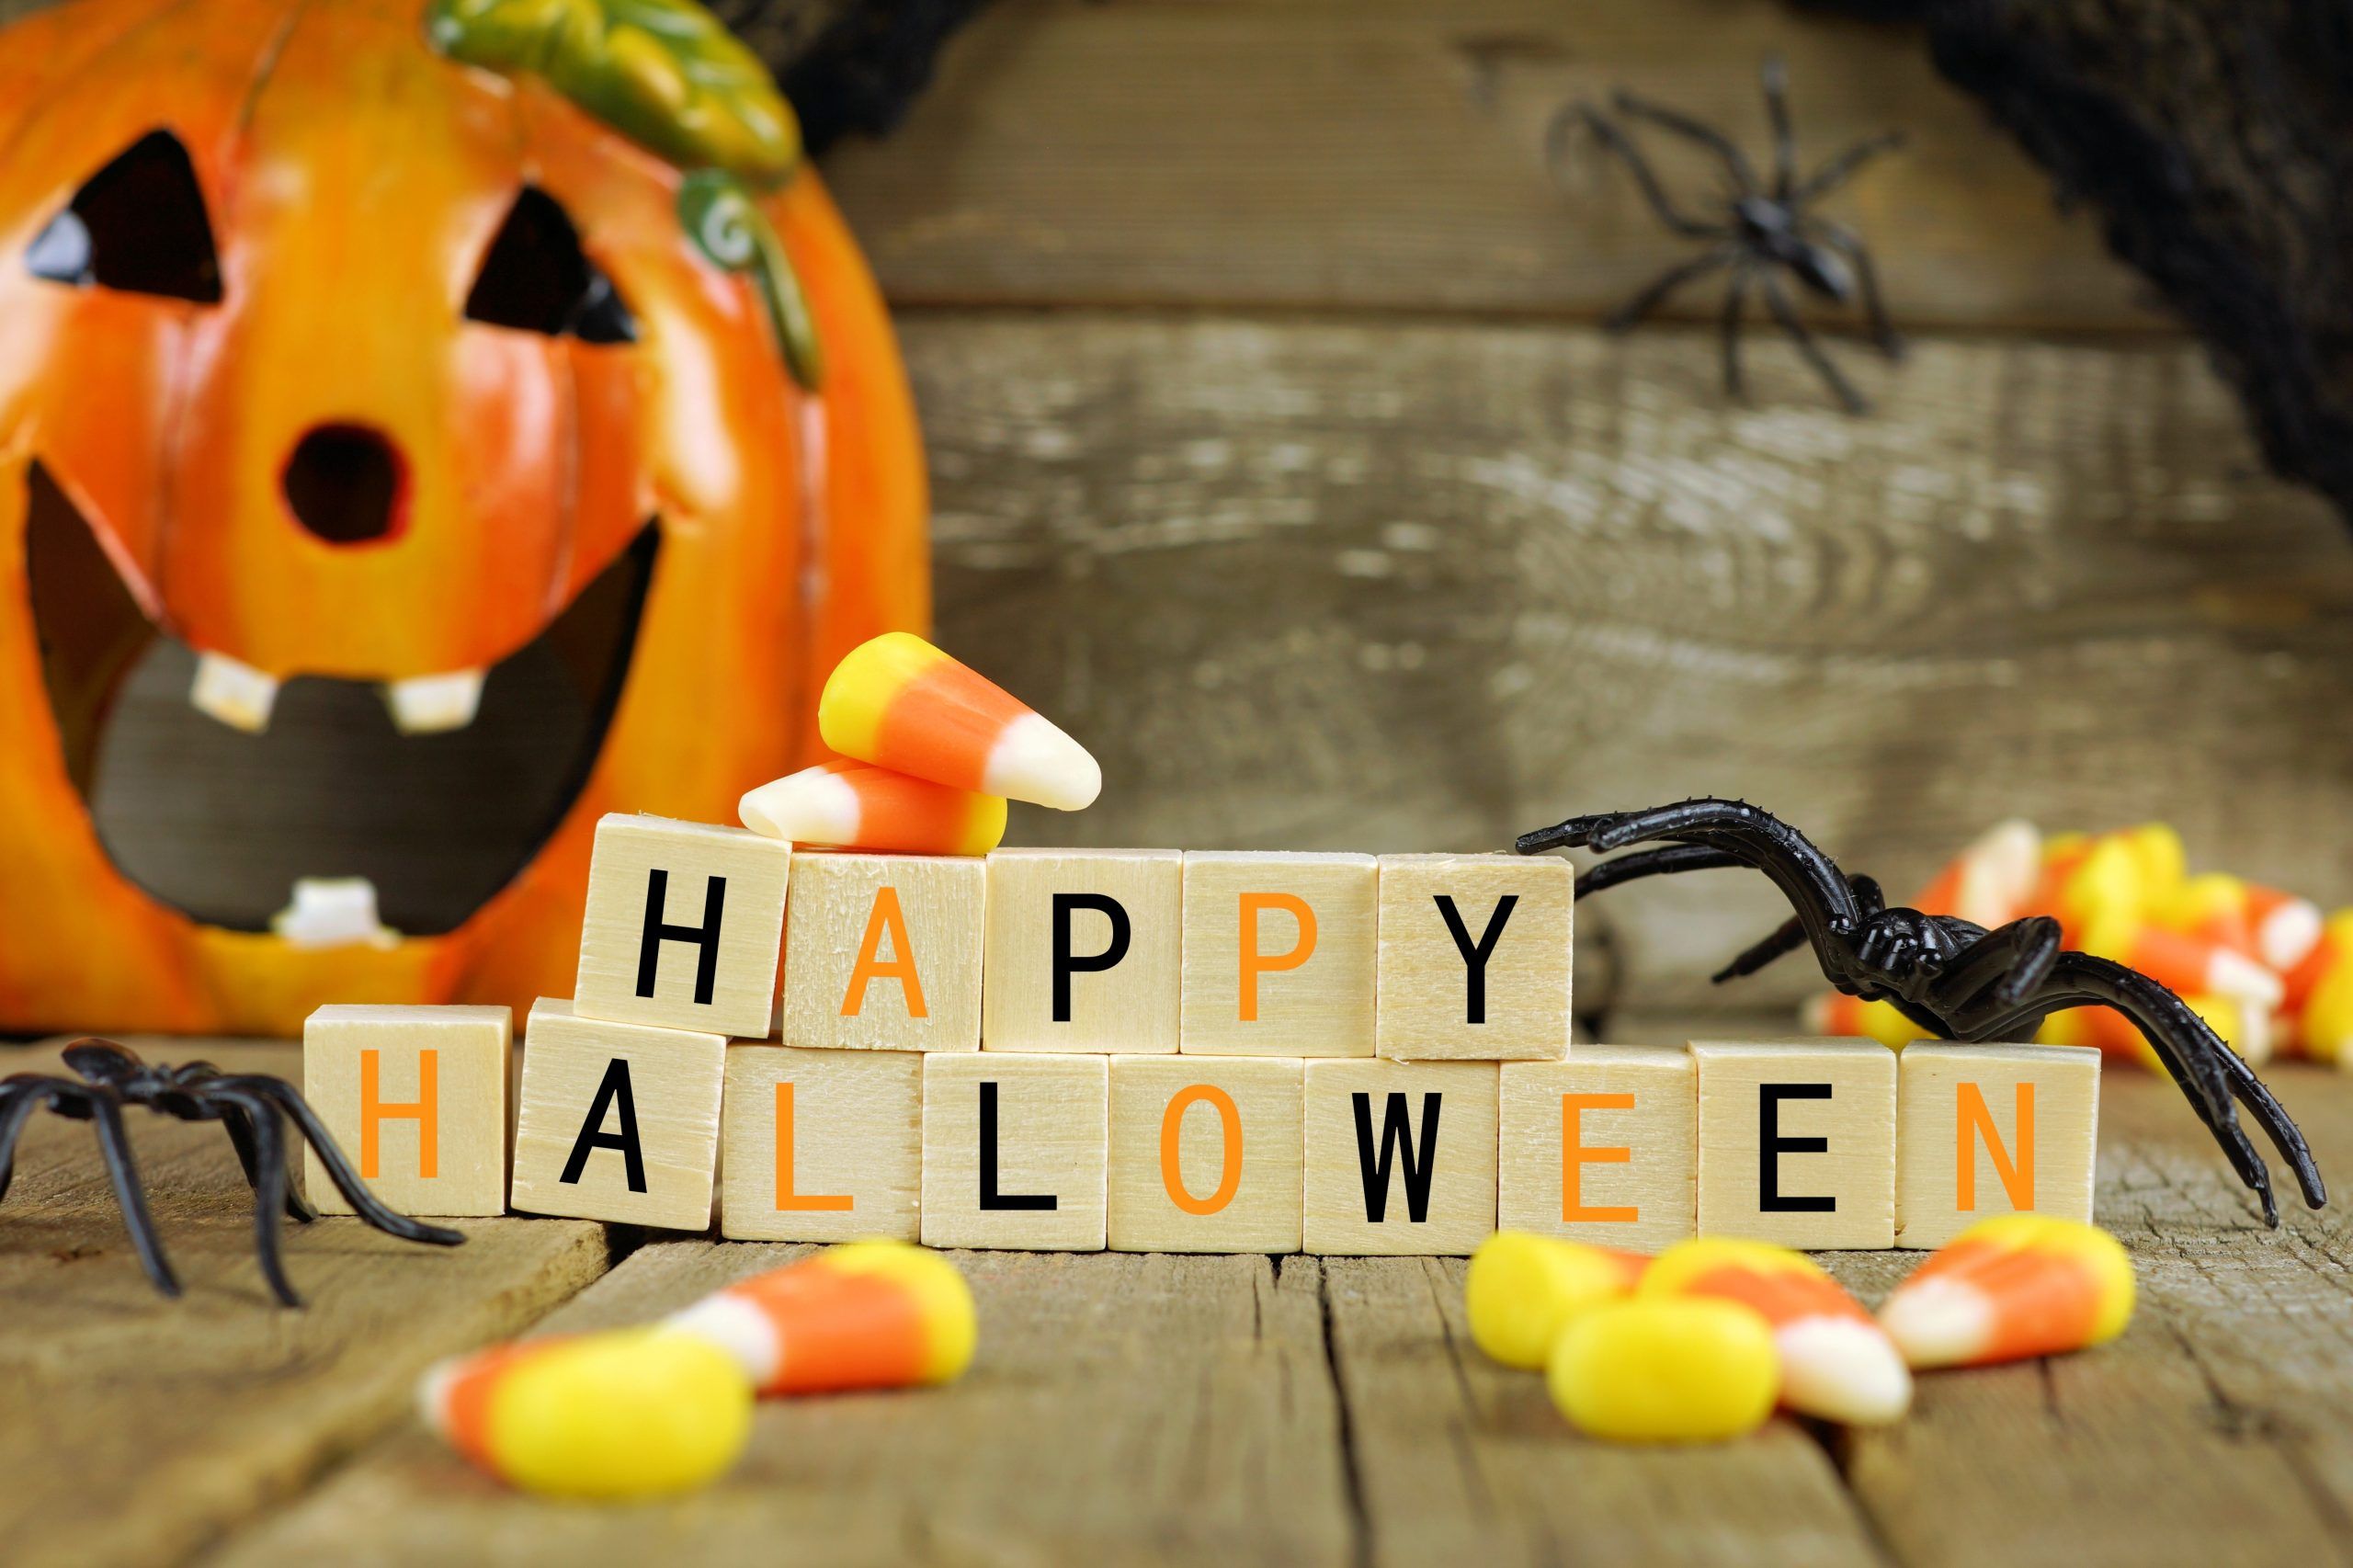 Happy Halloween from Austin Air!